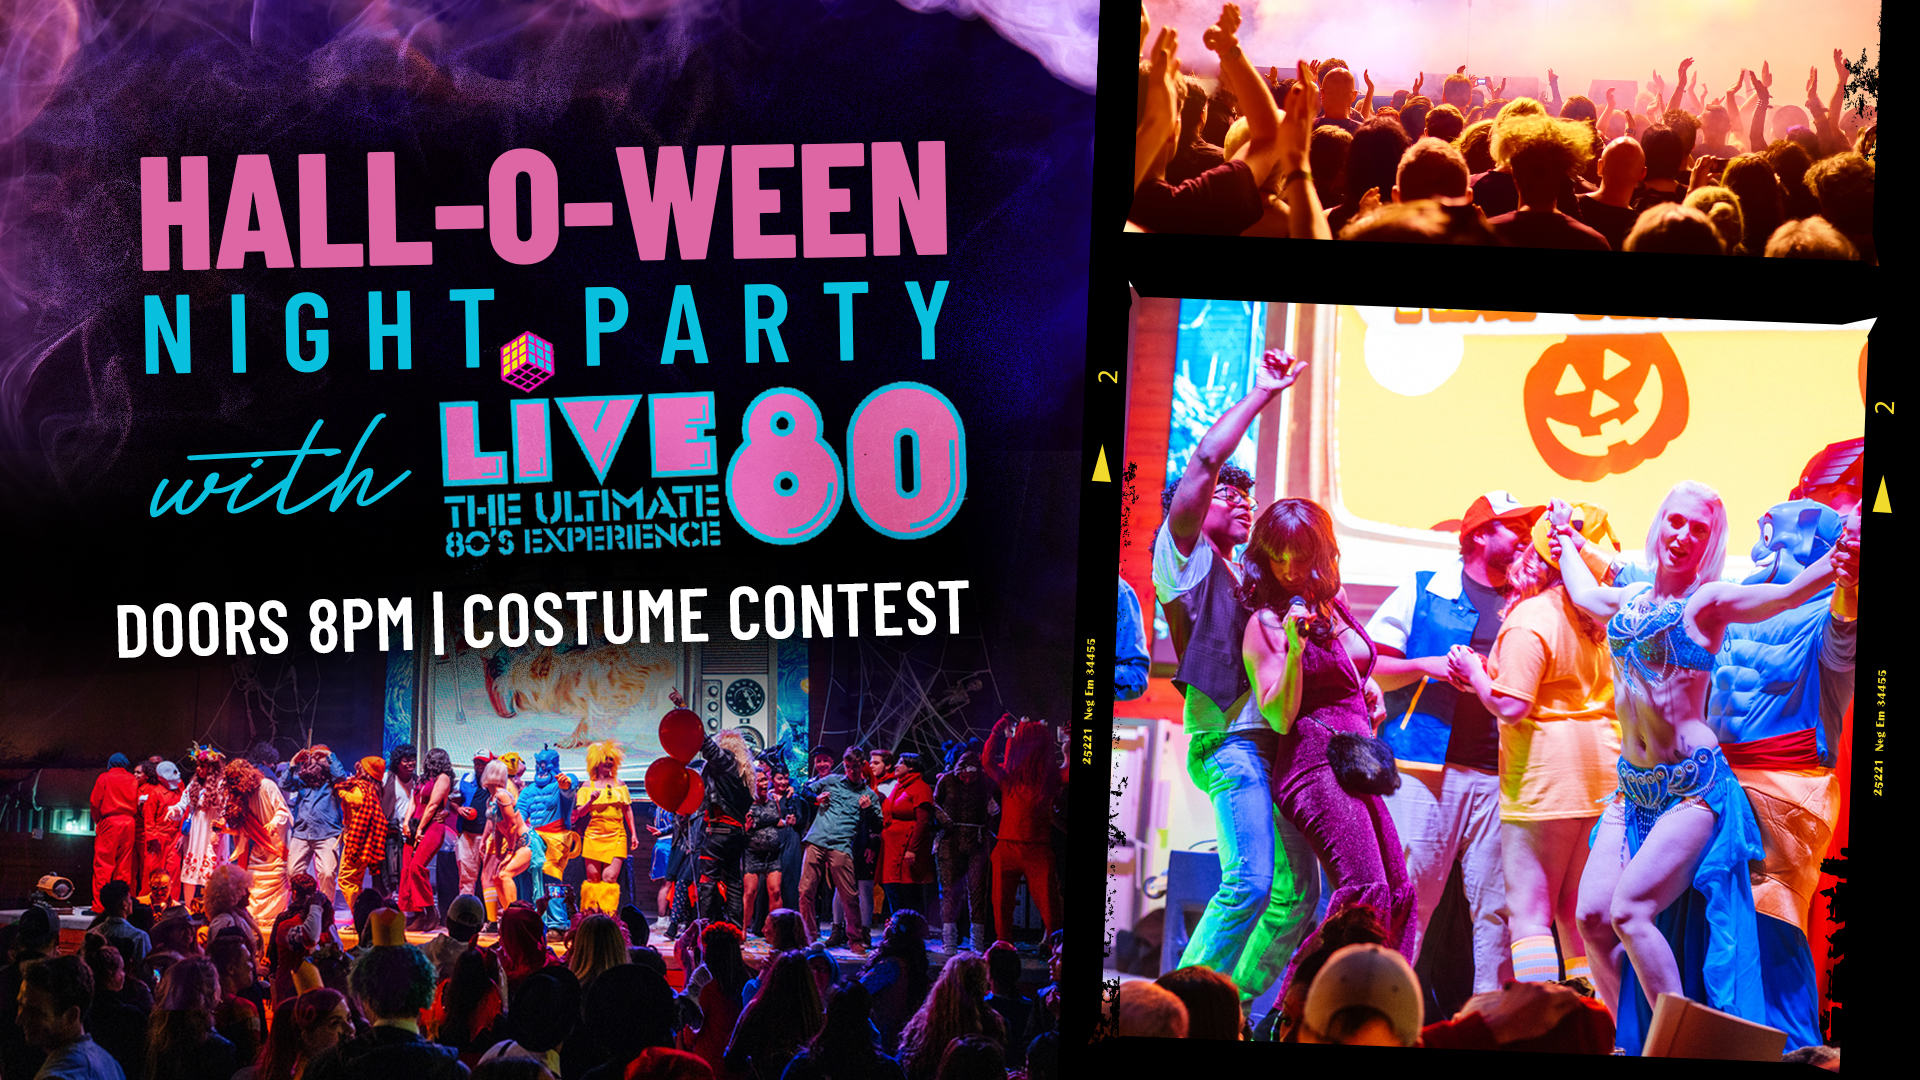 Hall-O-Ween Party with LIVE 80 at Legacy Hall - hero